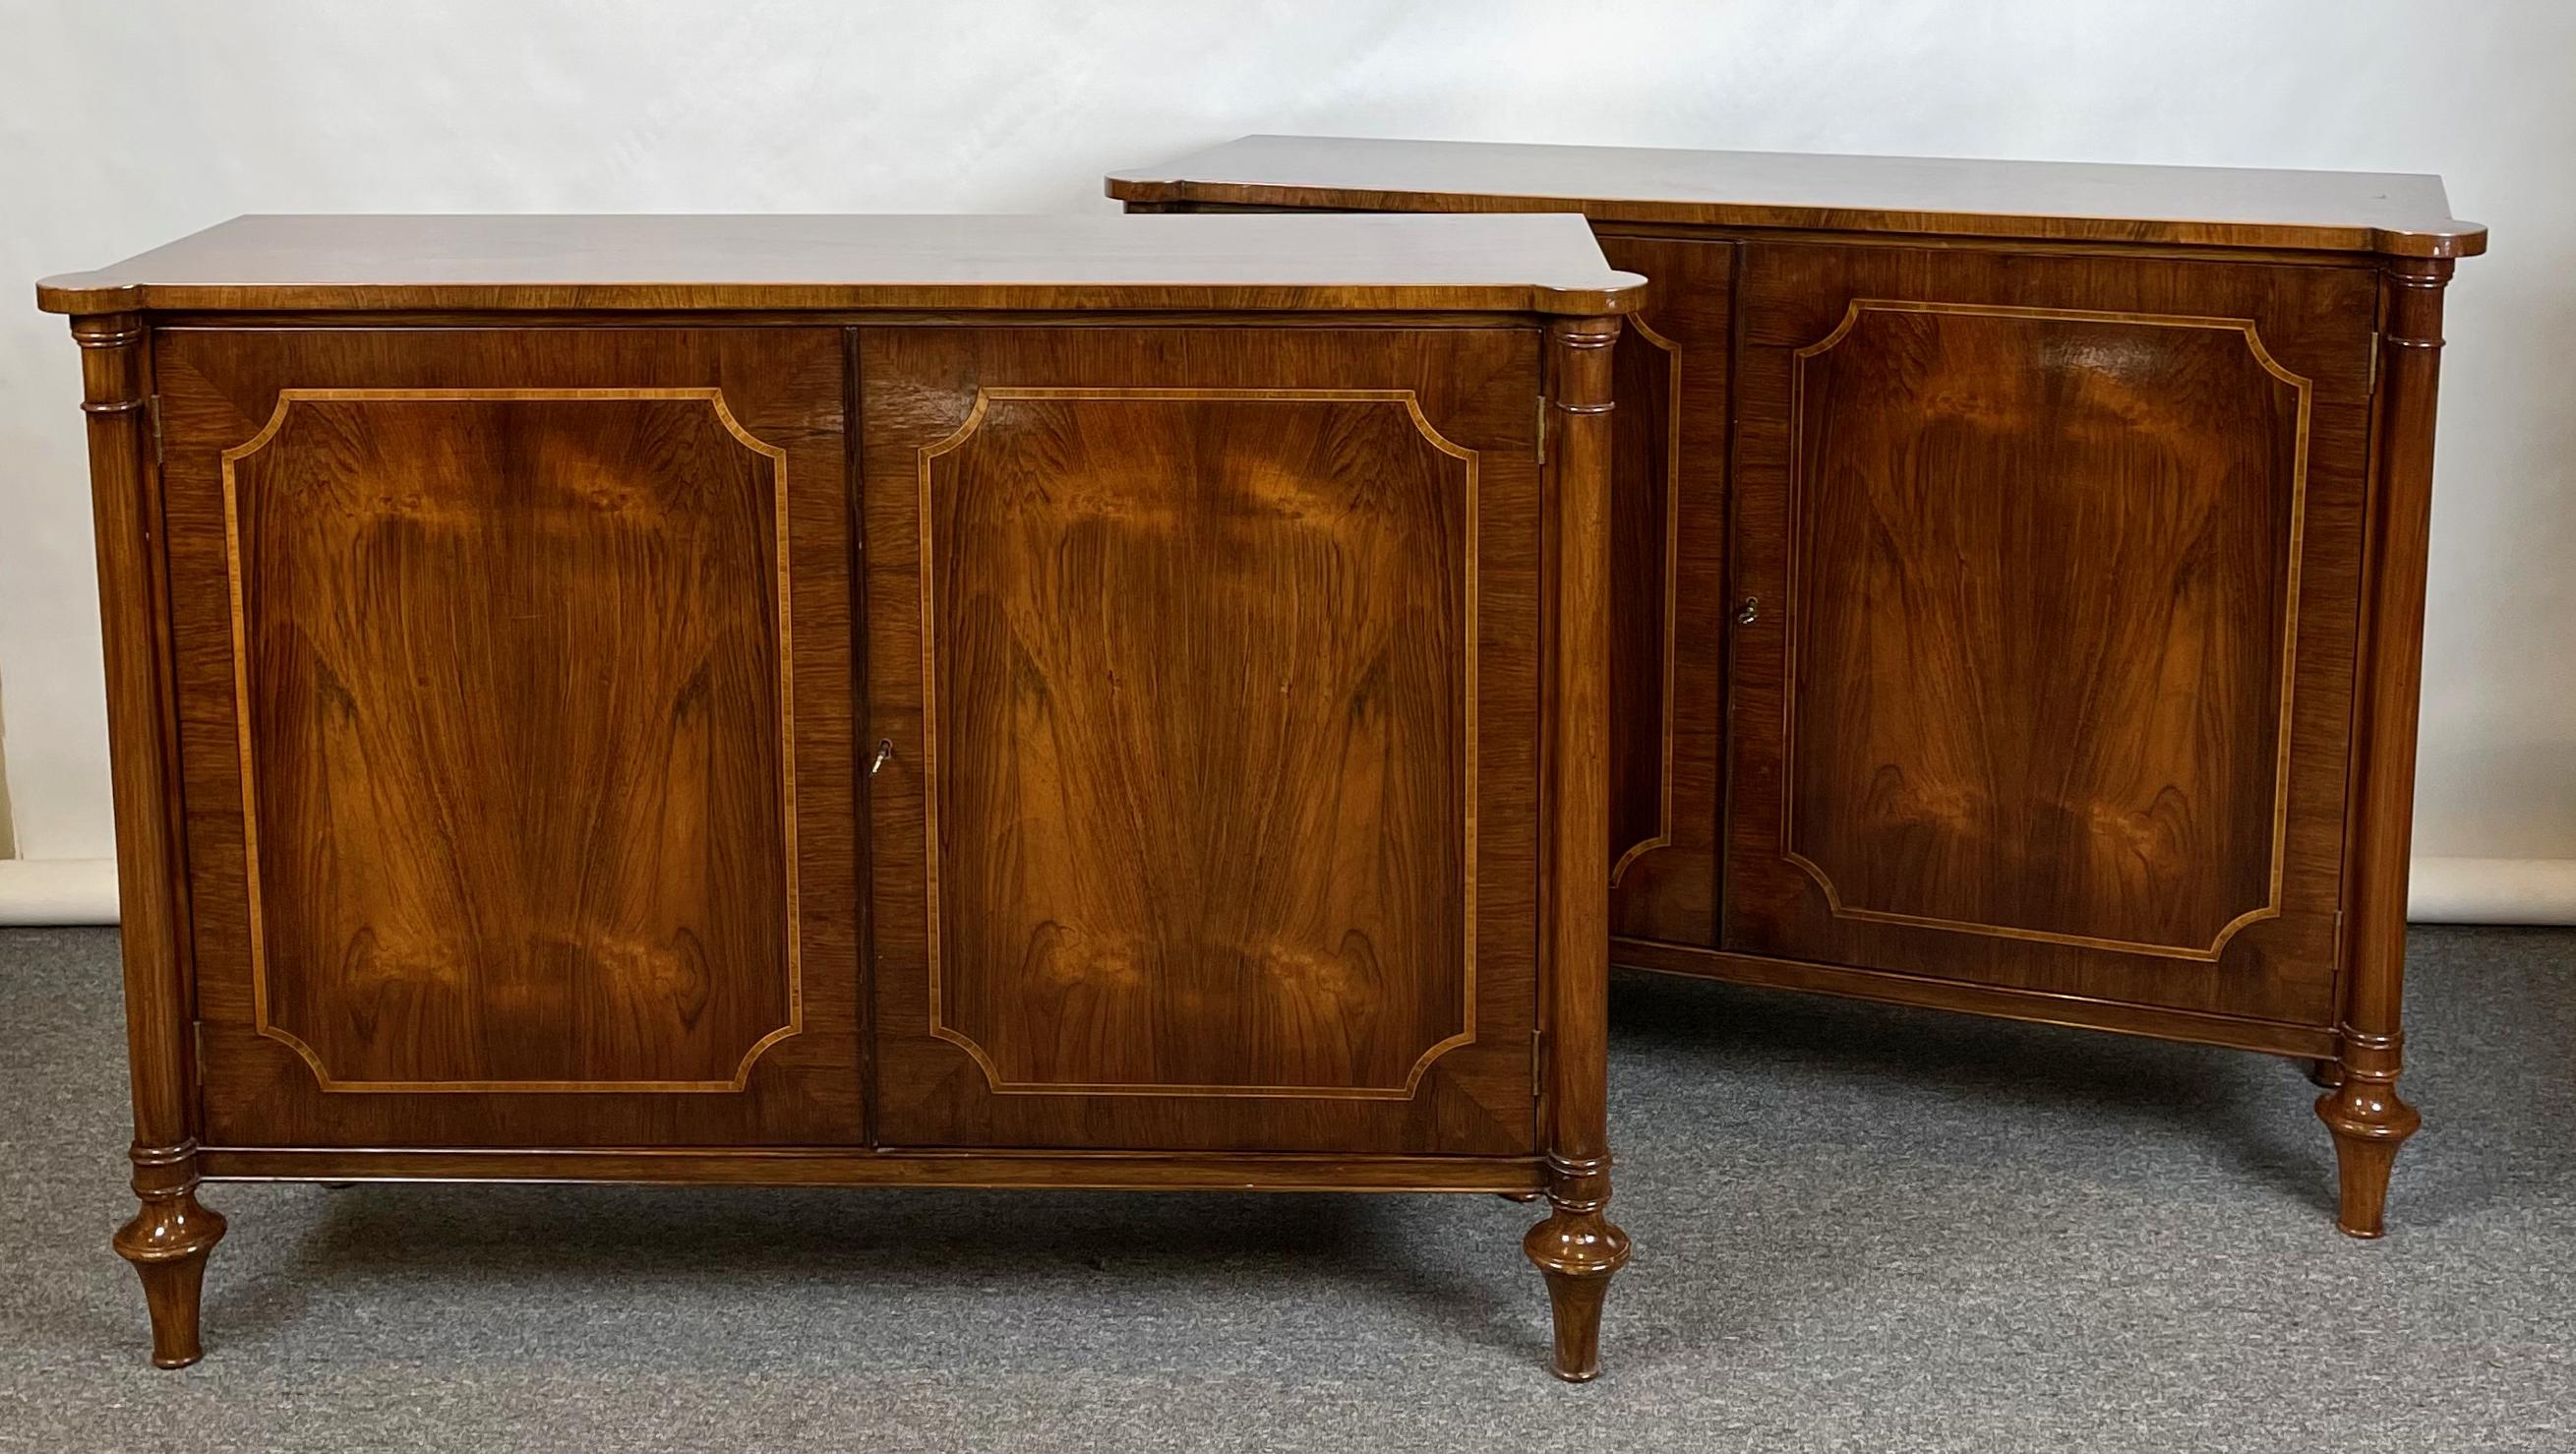 A pair of finely crafted mid-20th C. Regency style rosewood cabinets, each having two doors revealing interior shelves.